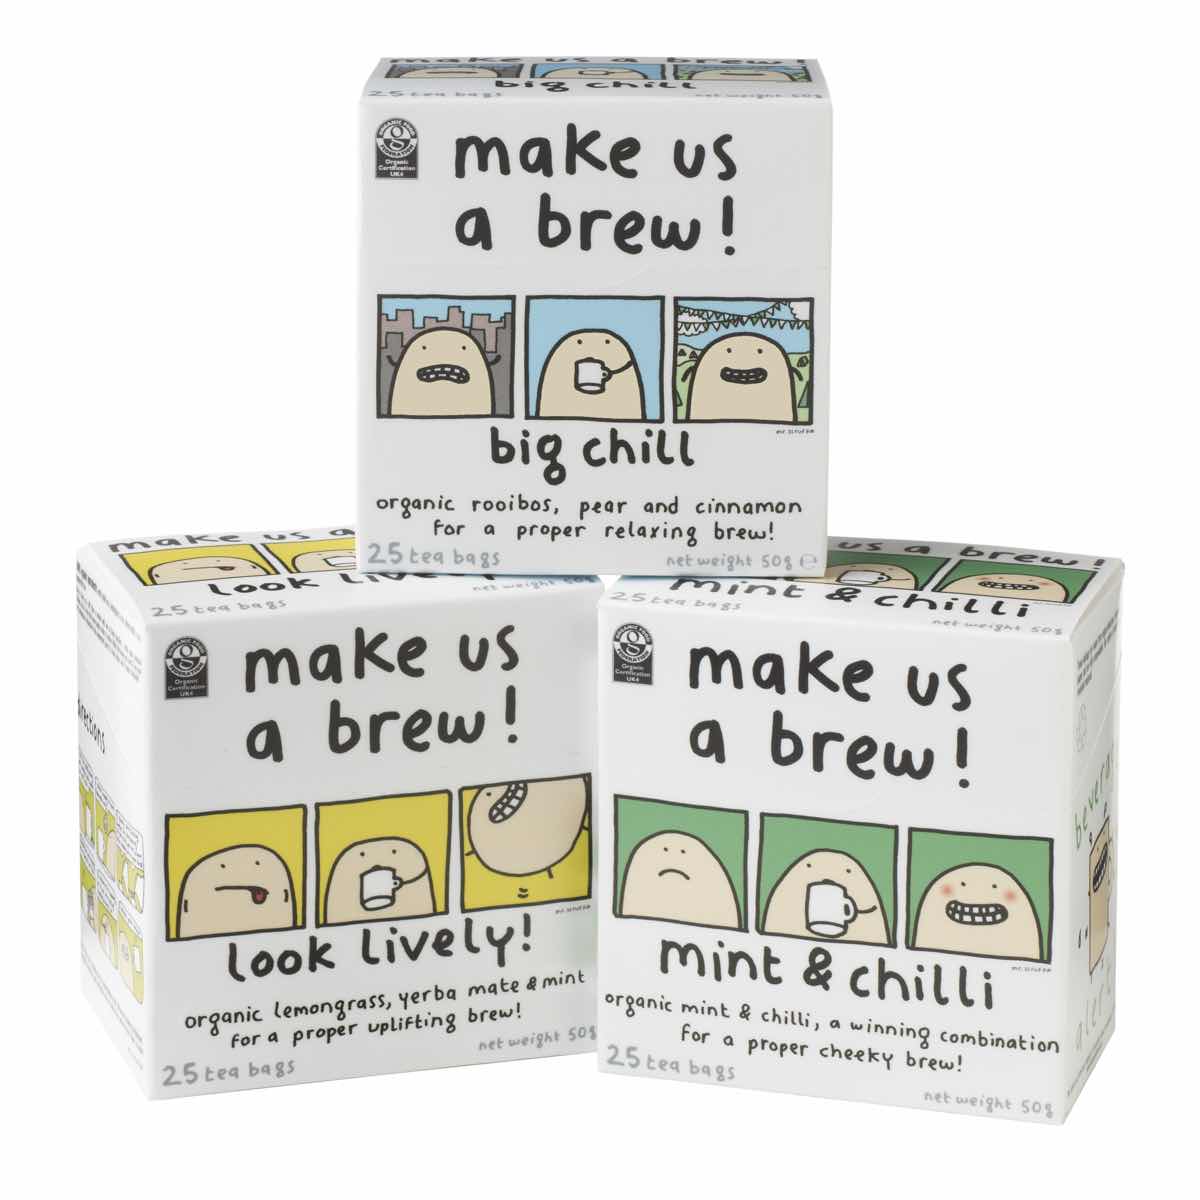 Herbal teas from Make Us A Brew